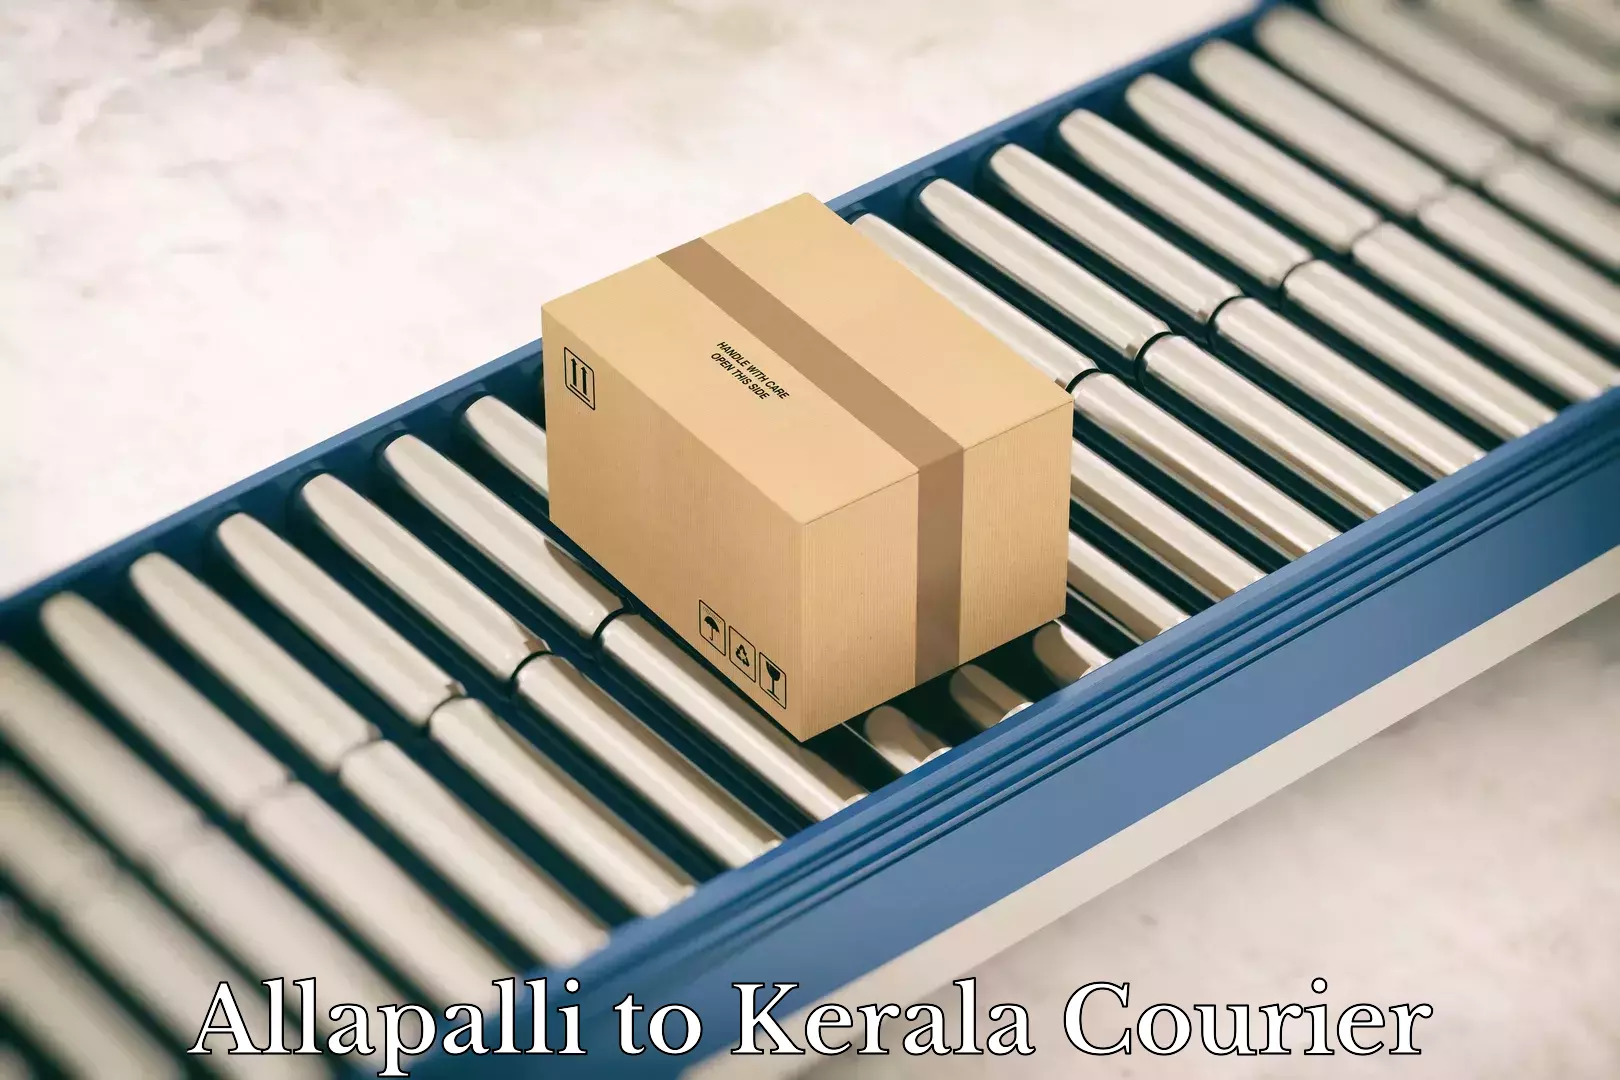 Same-day delivery options Allapalli to Kerala